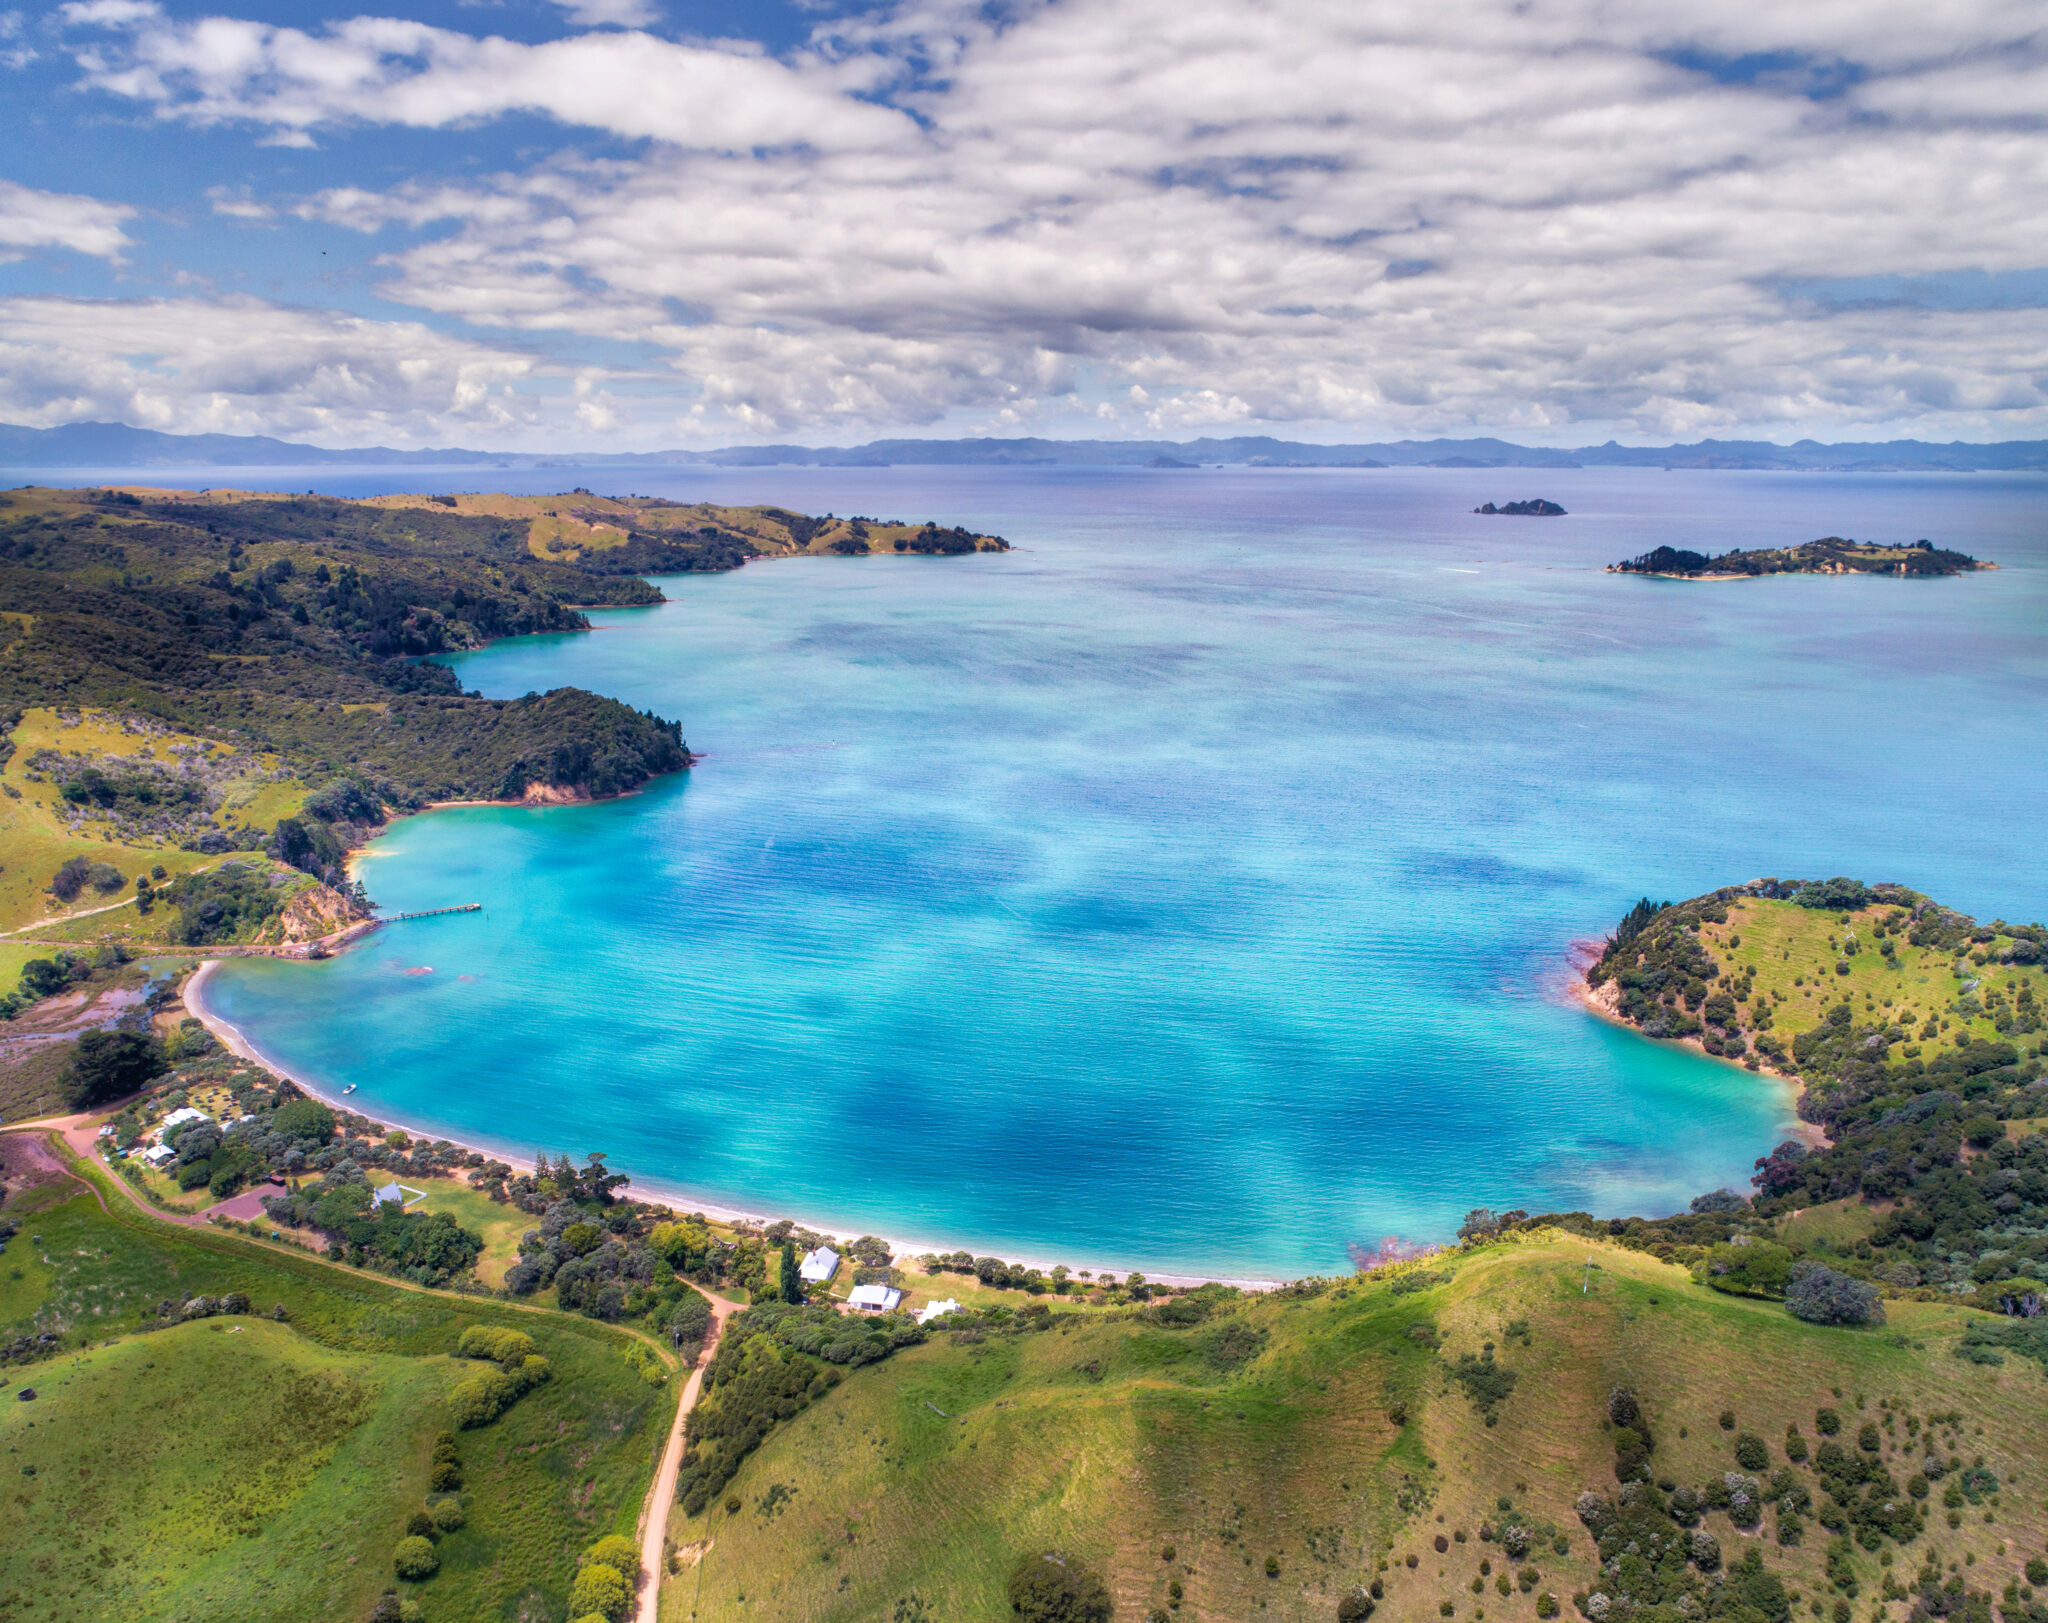 Aerial view of serene Wiheke coastal landscape featuring a turquoise bay surrounded by lush green hills and small islands in the distance. The sky is partly cloudy, adding depth to the vibrant scene. A few buildings and roads are visible near the shoreline.